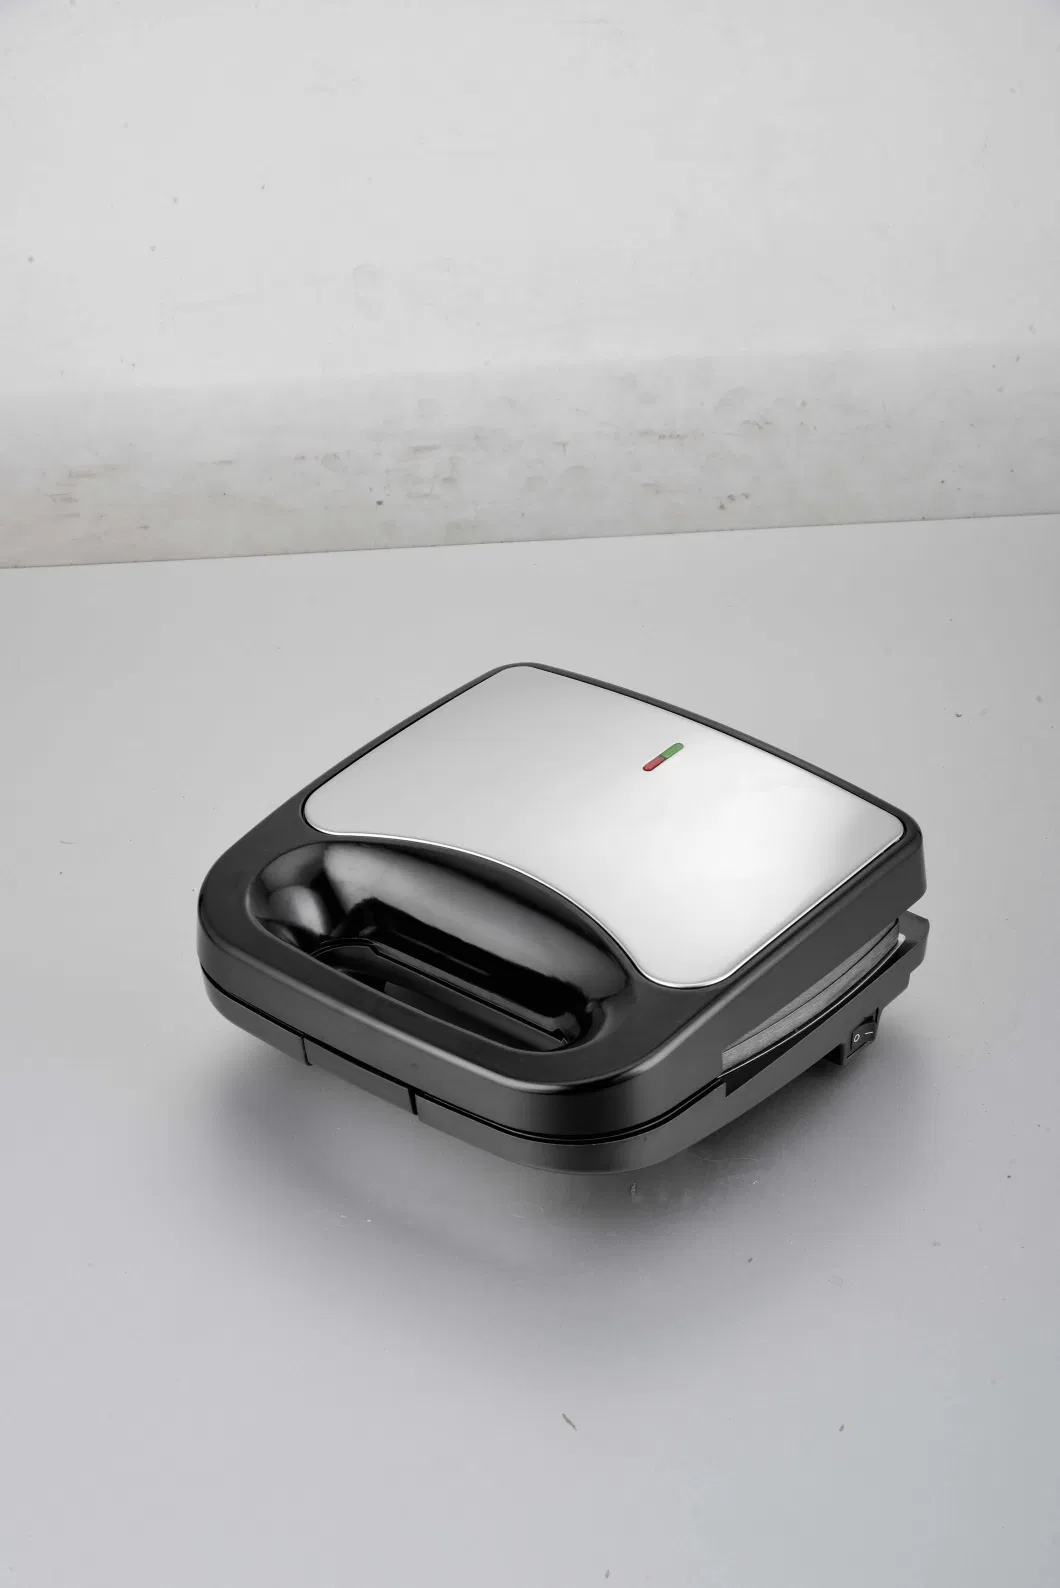 Stainless Steel 3 in 1 Detachable Switching Sandwich Waffle Grill Maker